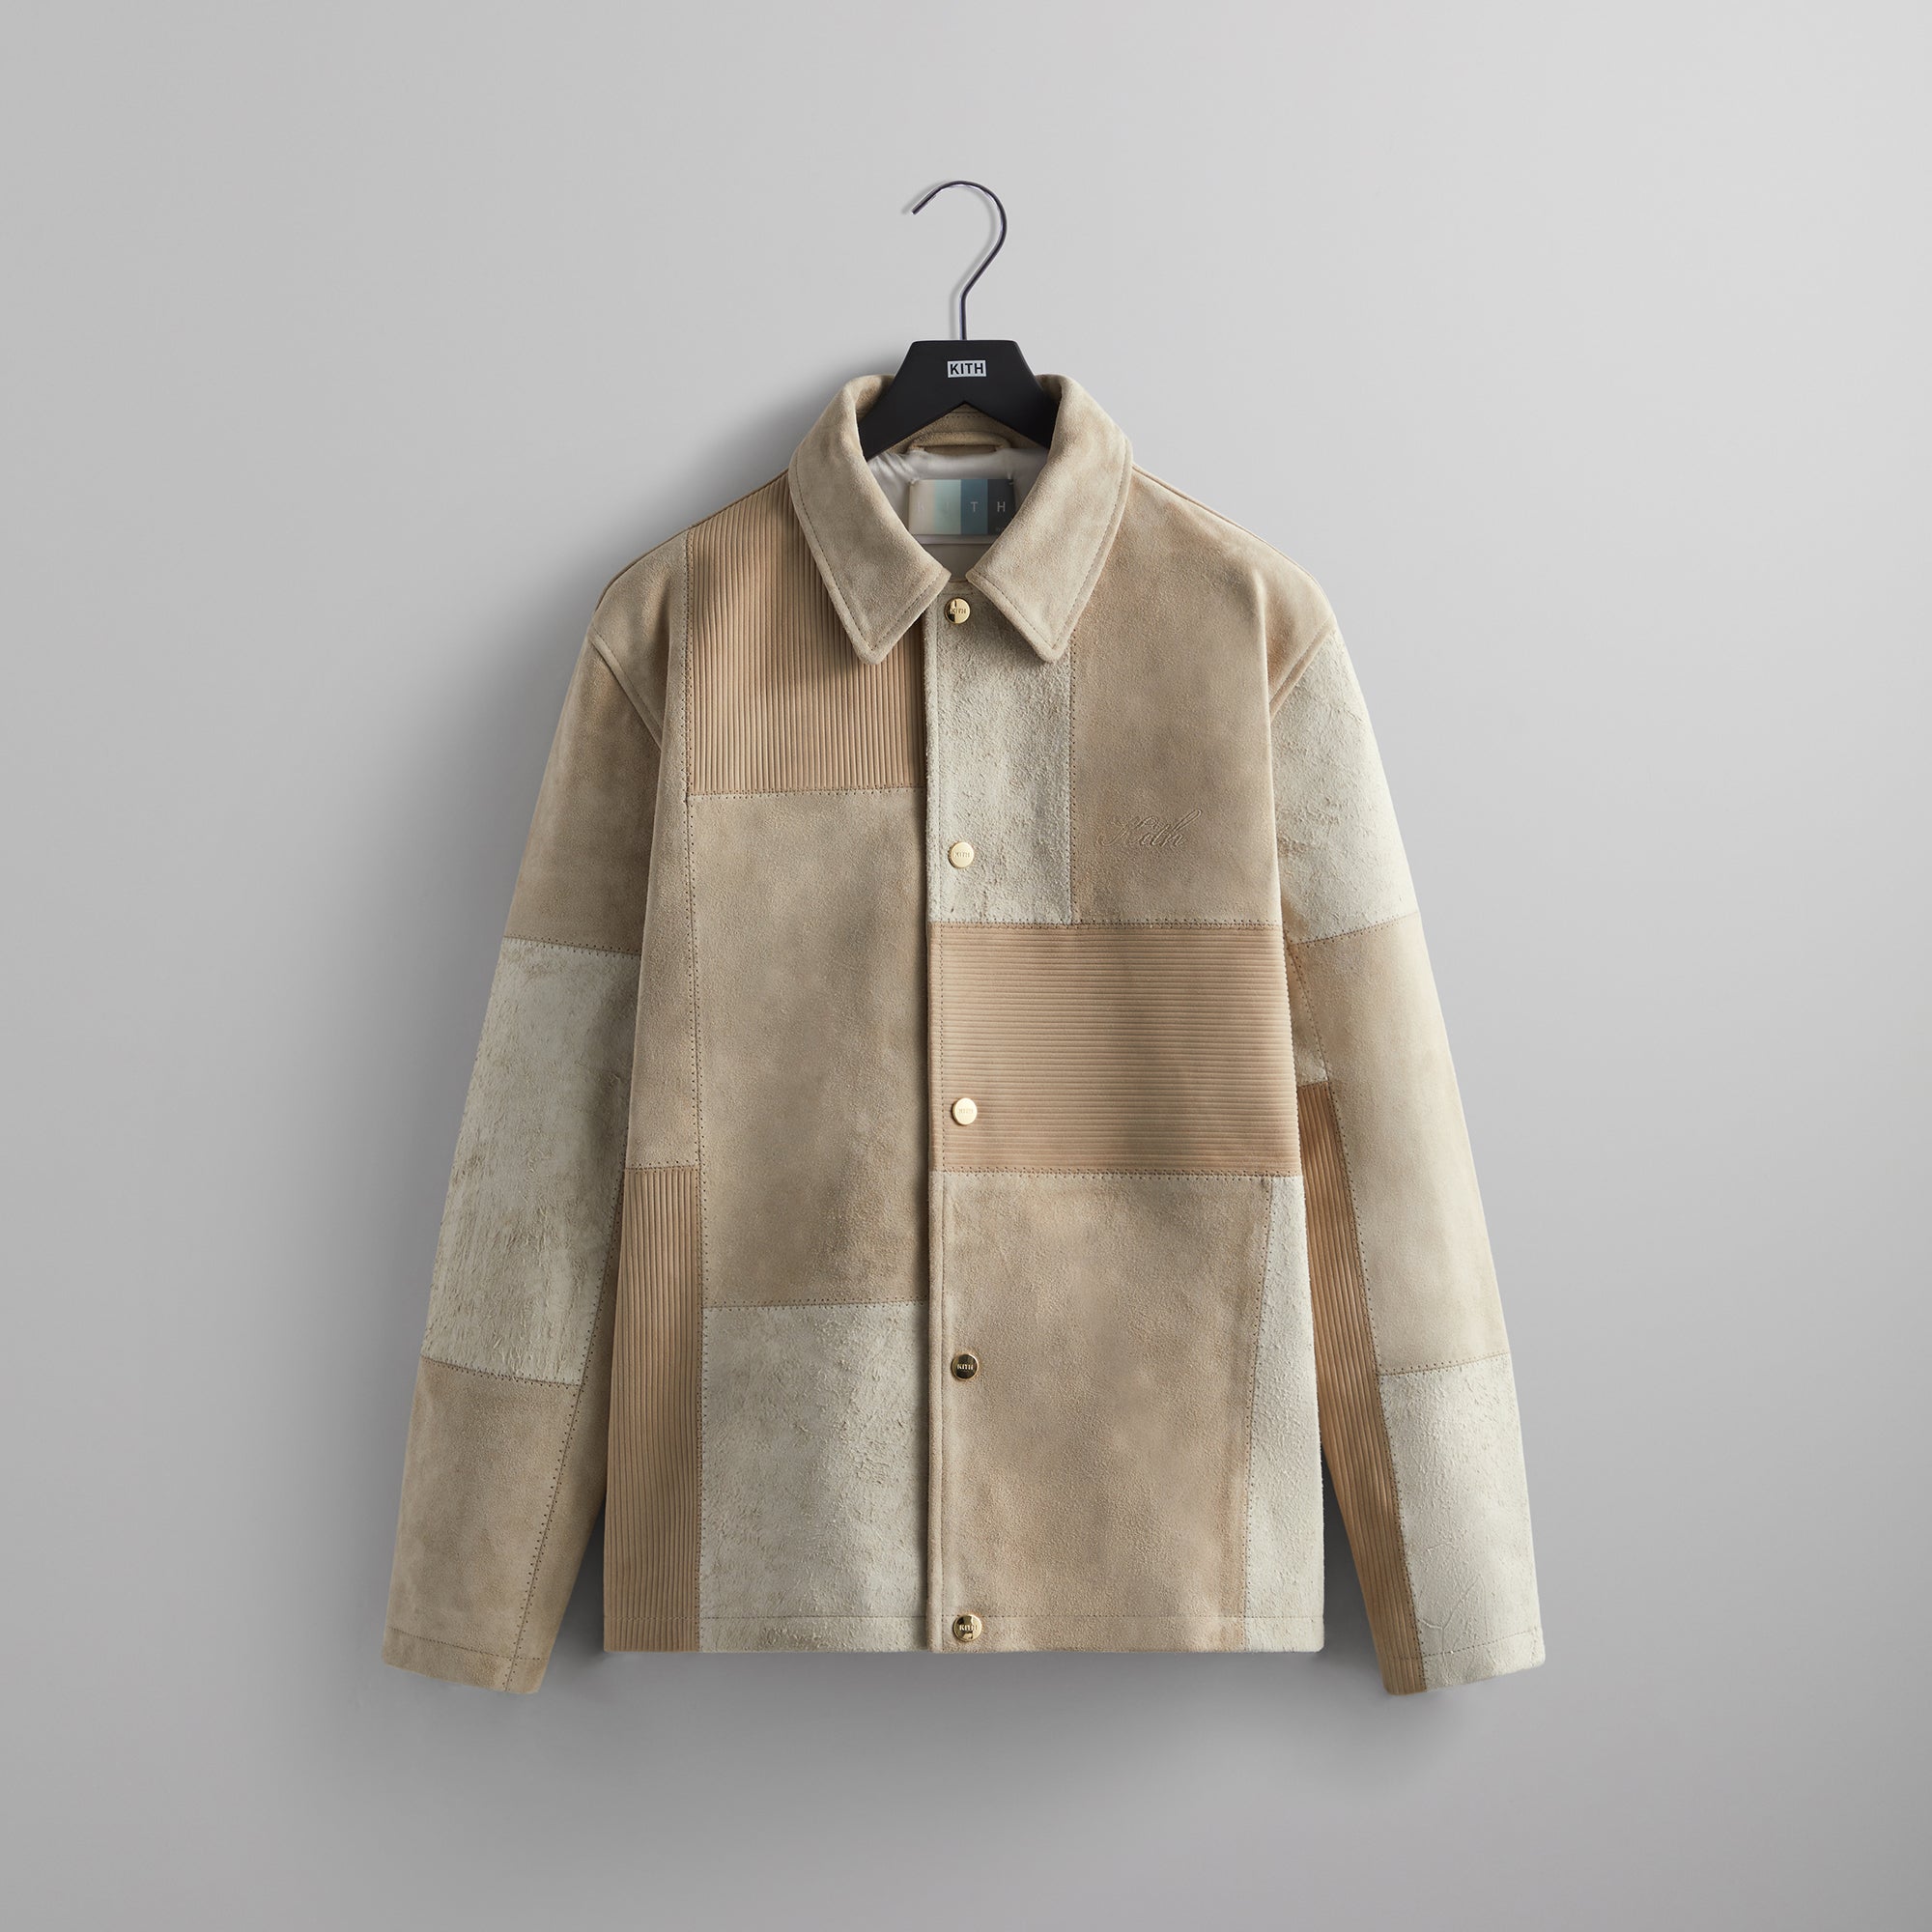 Kith Patchwork Suede Coaches Jacket - Shea